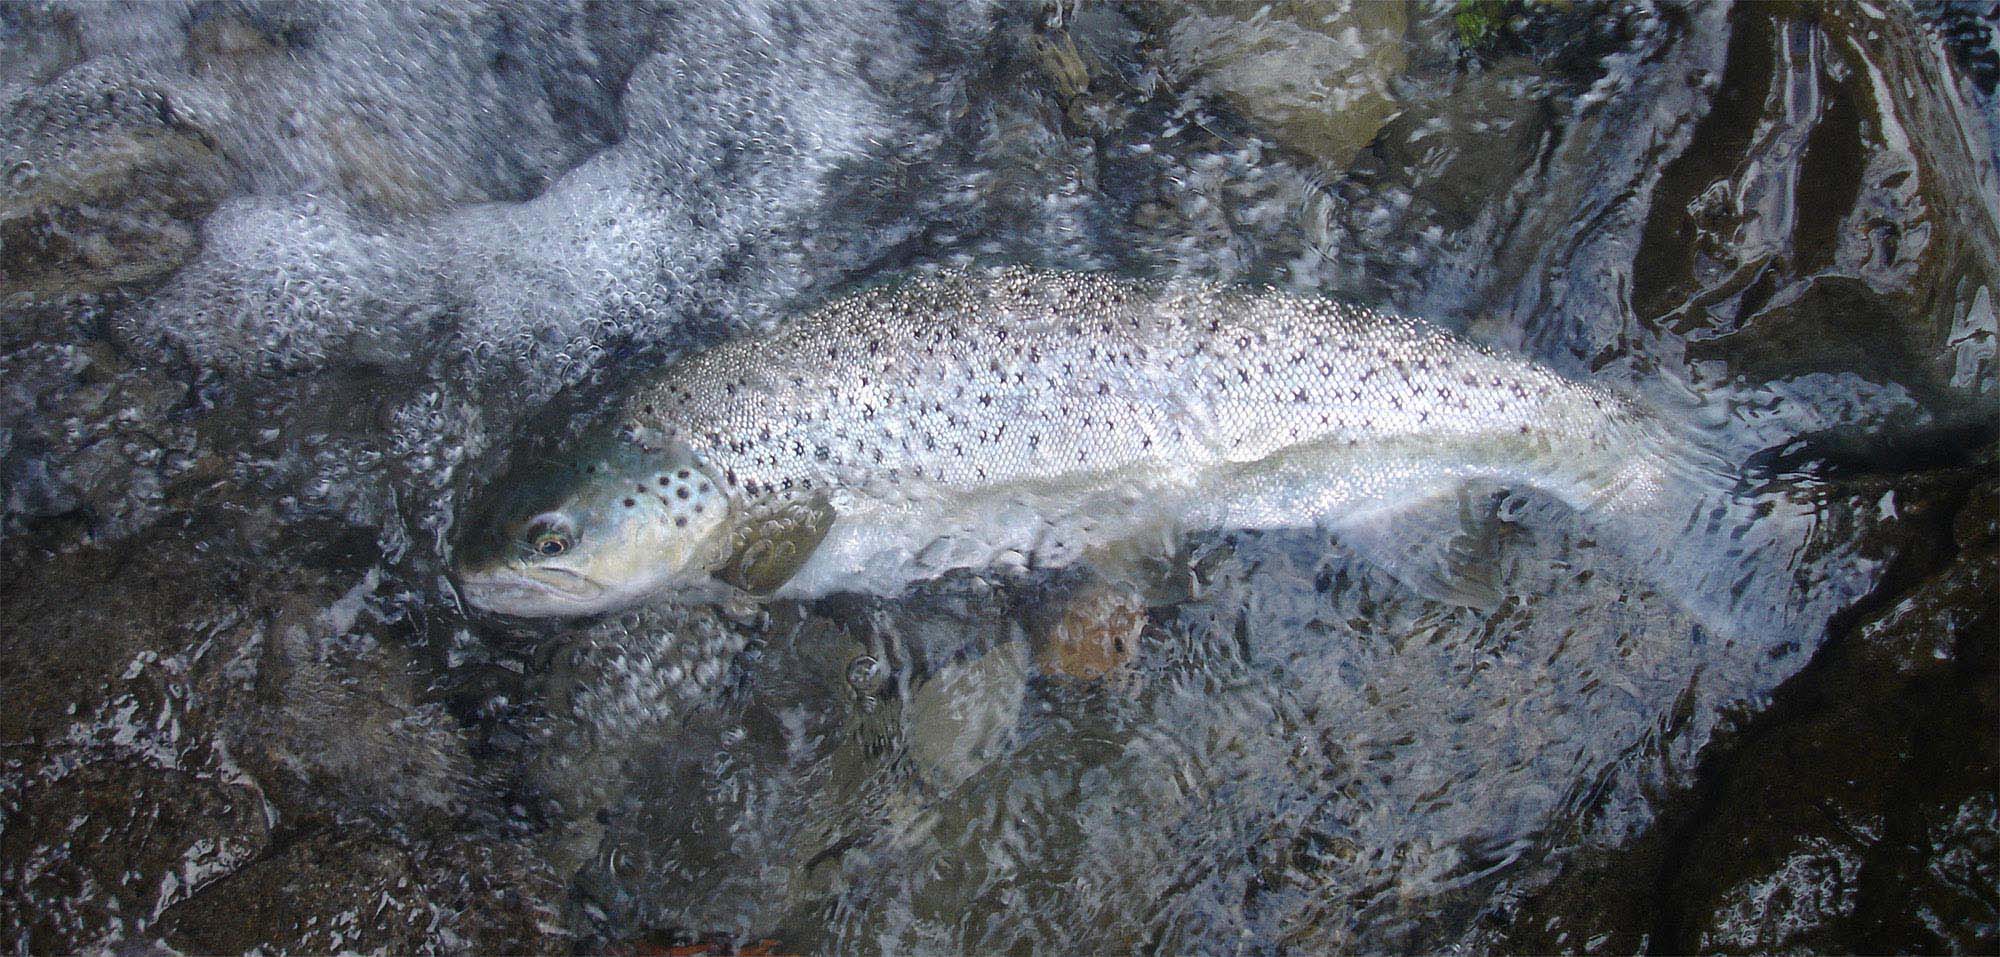 A healthy bright sea trout posed in shallows of frothing bush stream